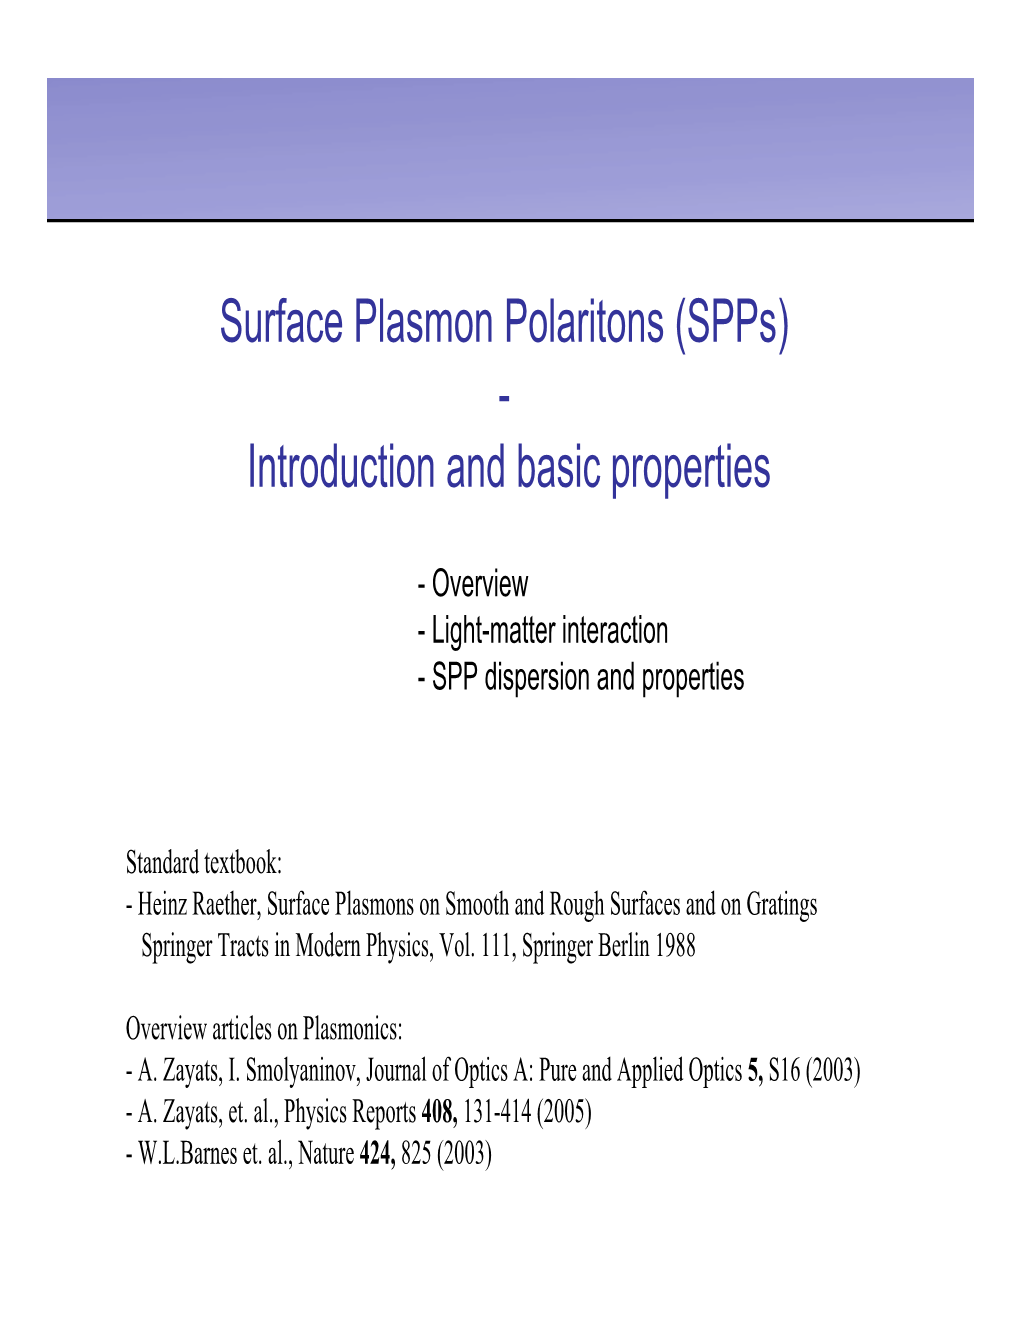 Surface Plasmon Polaritons (Spps) - Introduction and Basic Properties